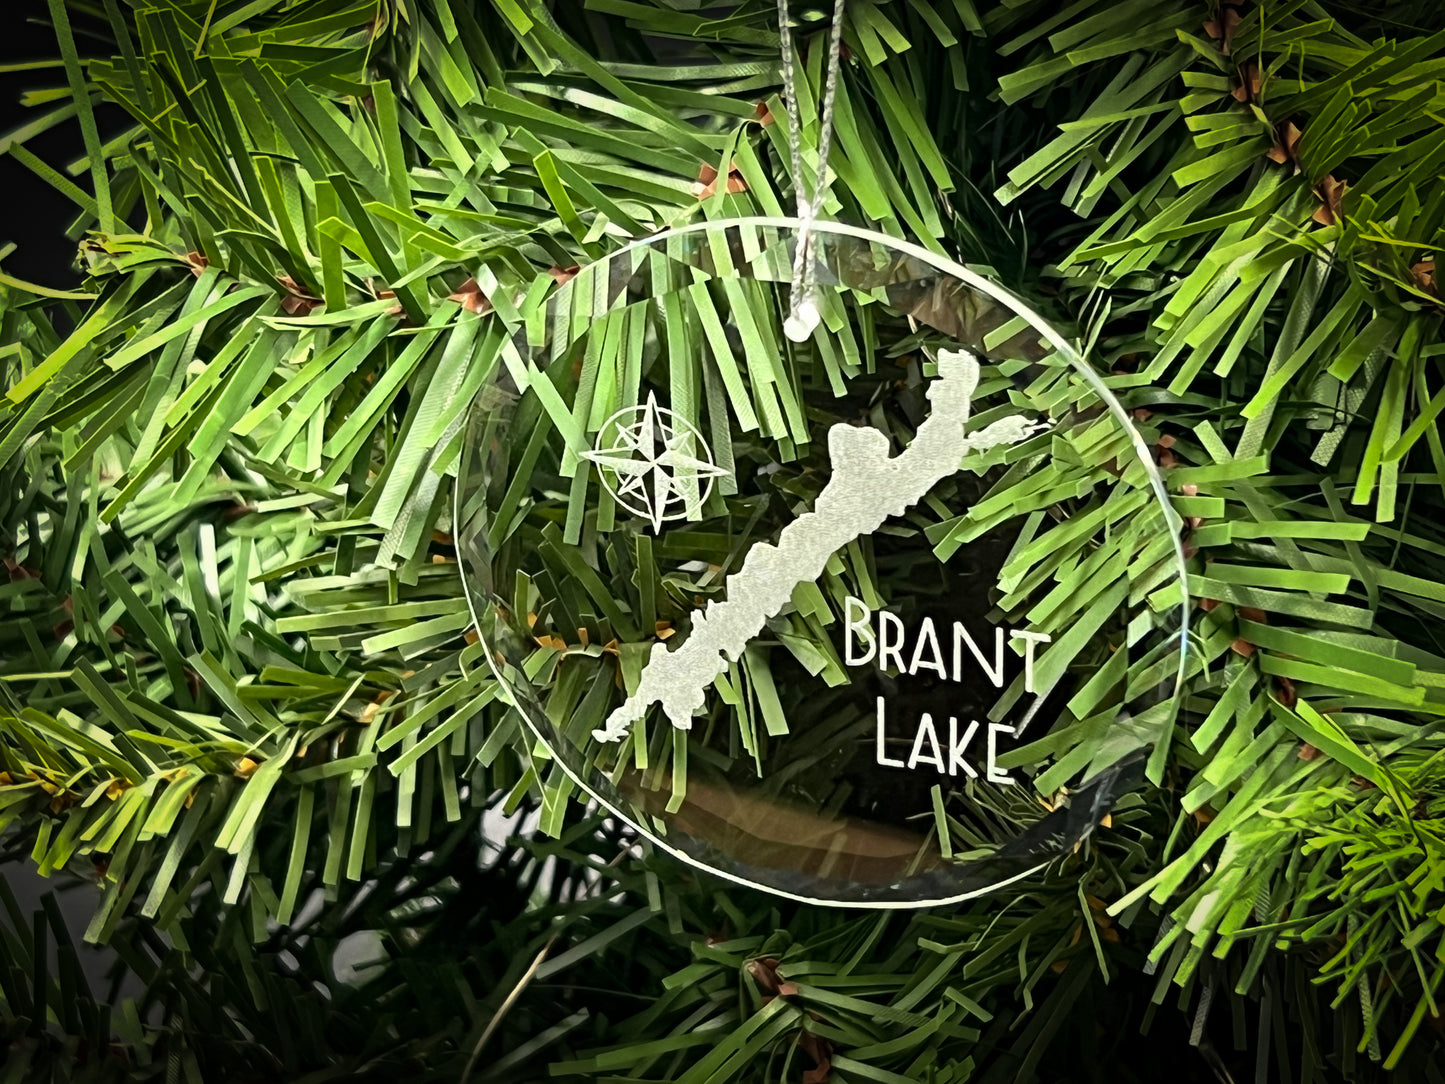 Brant Lake New York Round Clear Glass Ornament